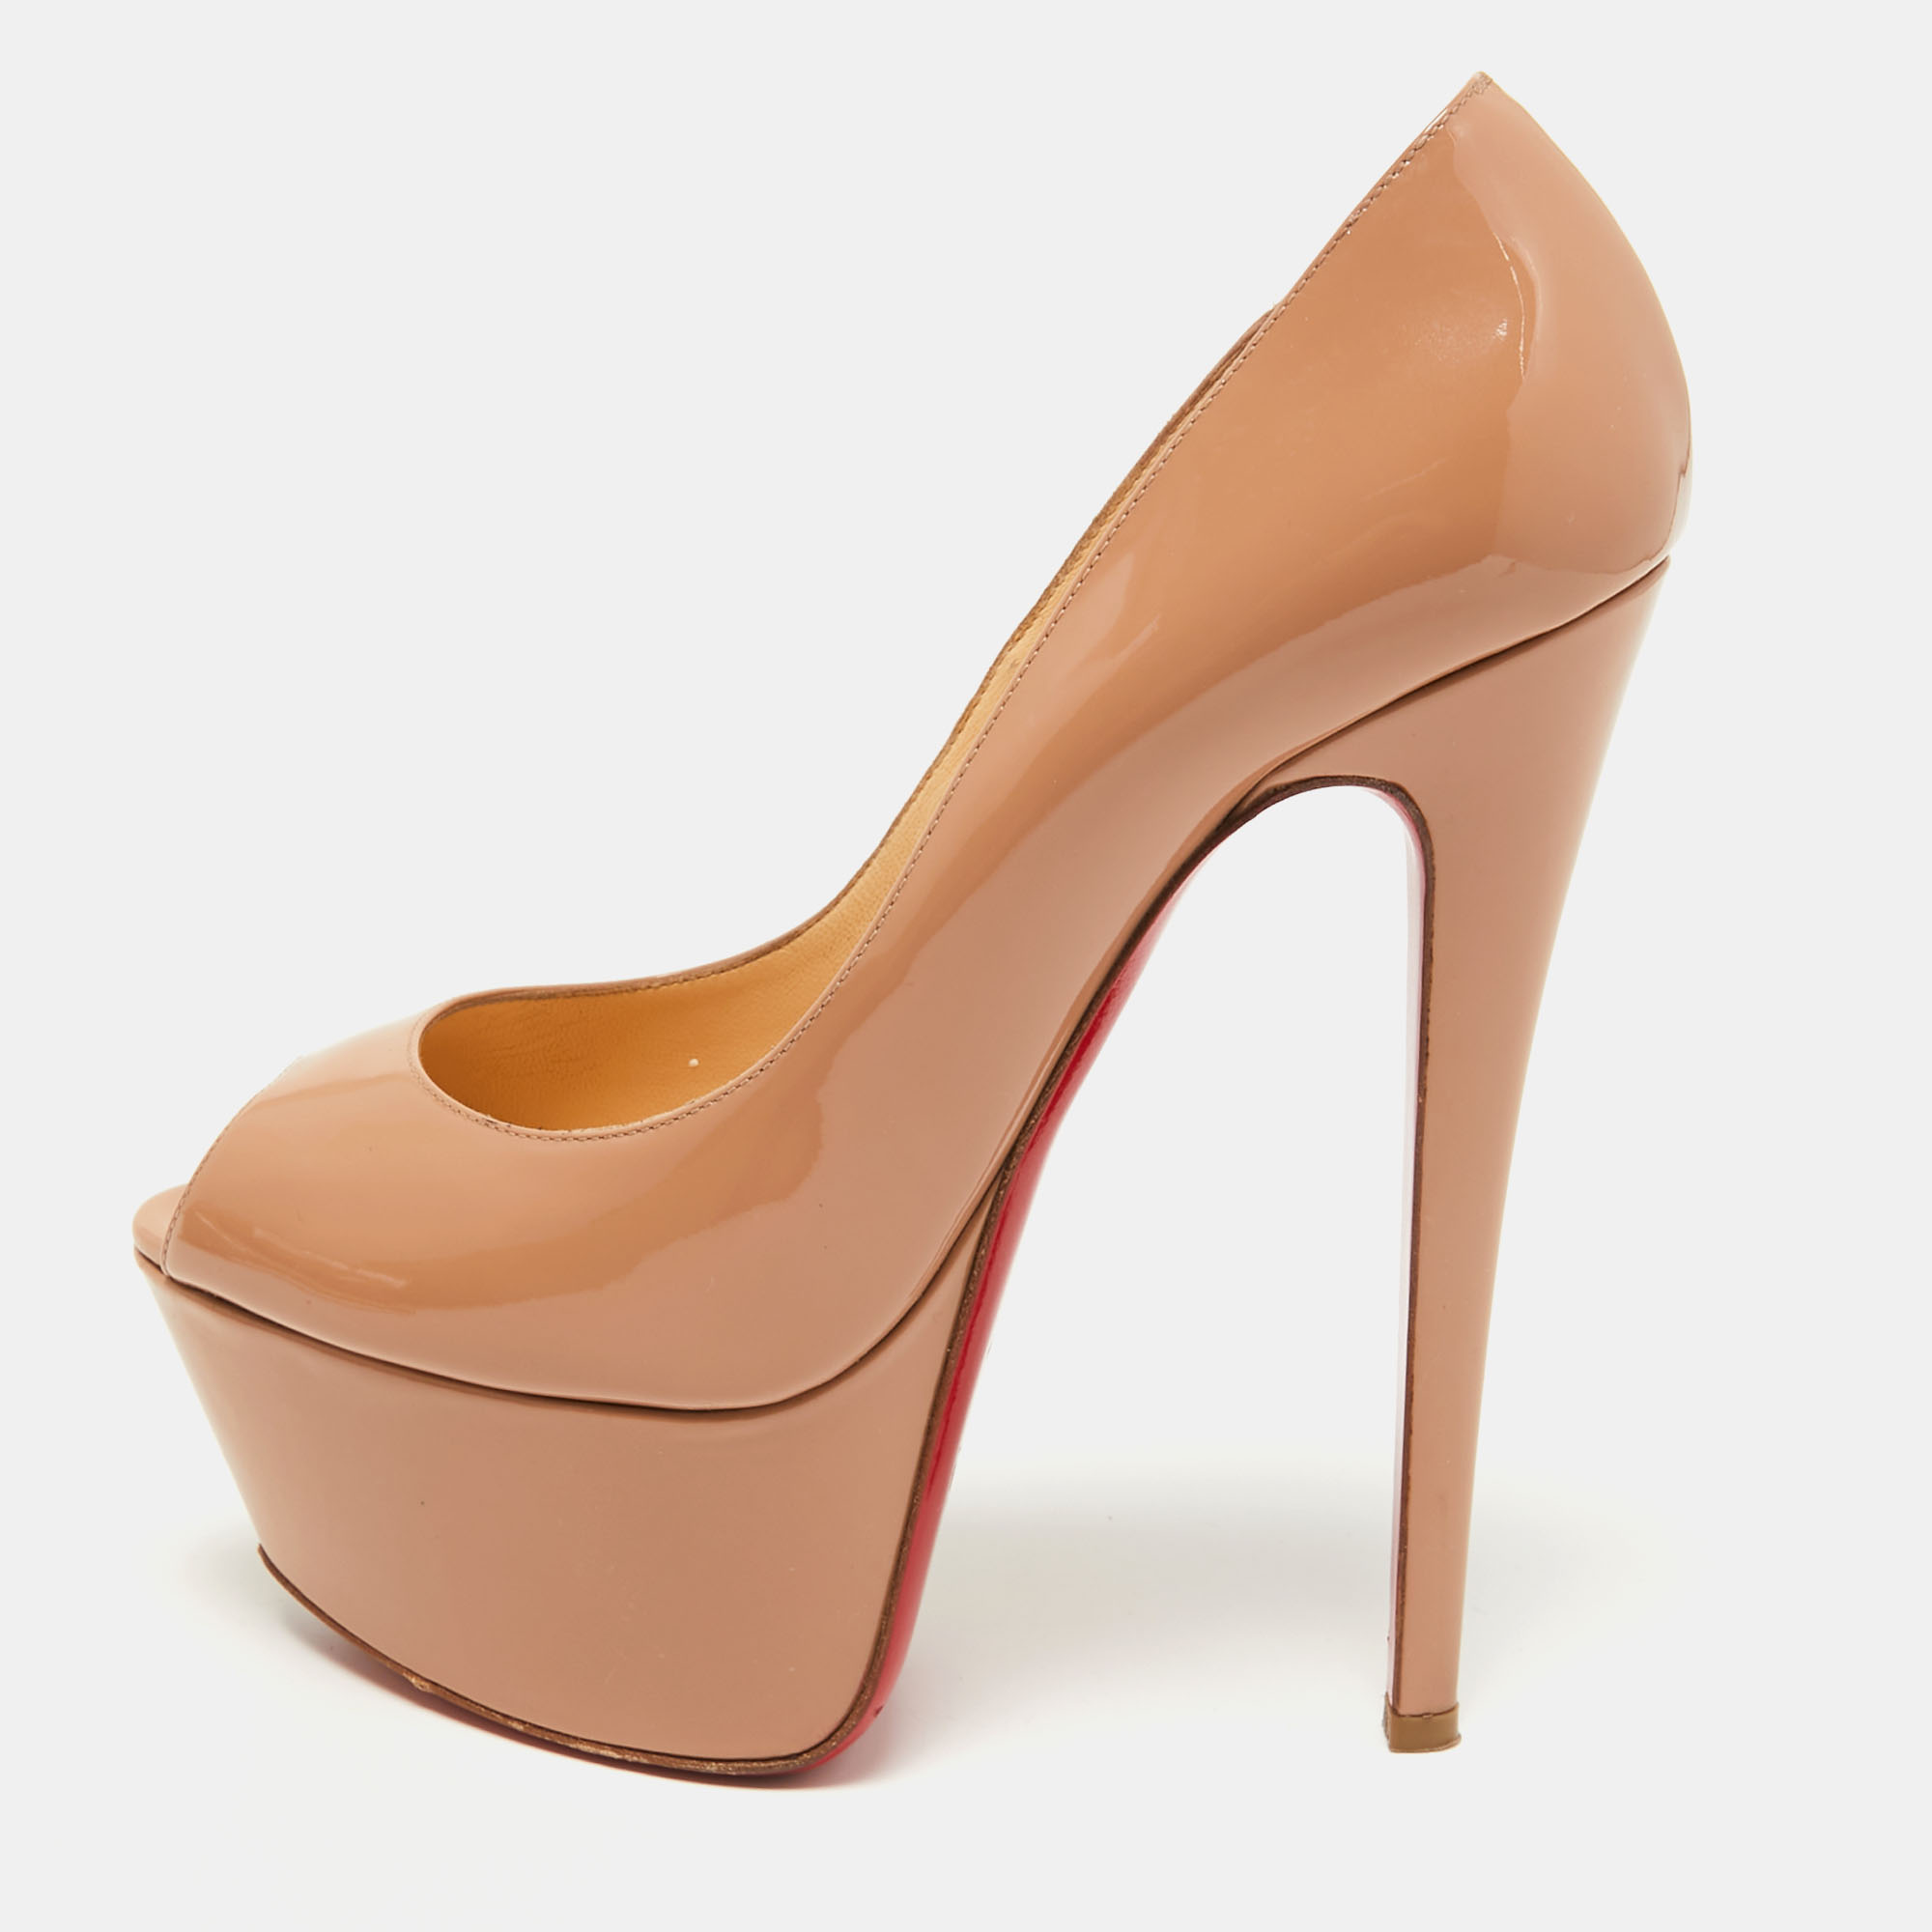 Pre-owned Christian Louboutin Beige Patent Leather Jamie Platform Pumps Size 38.5